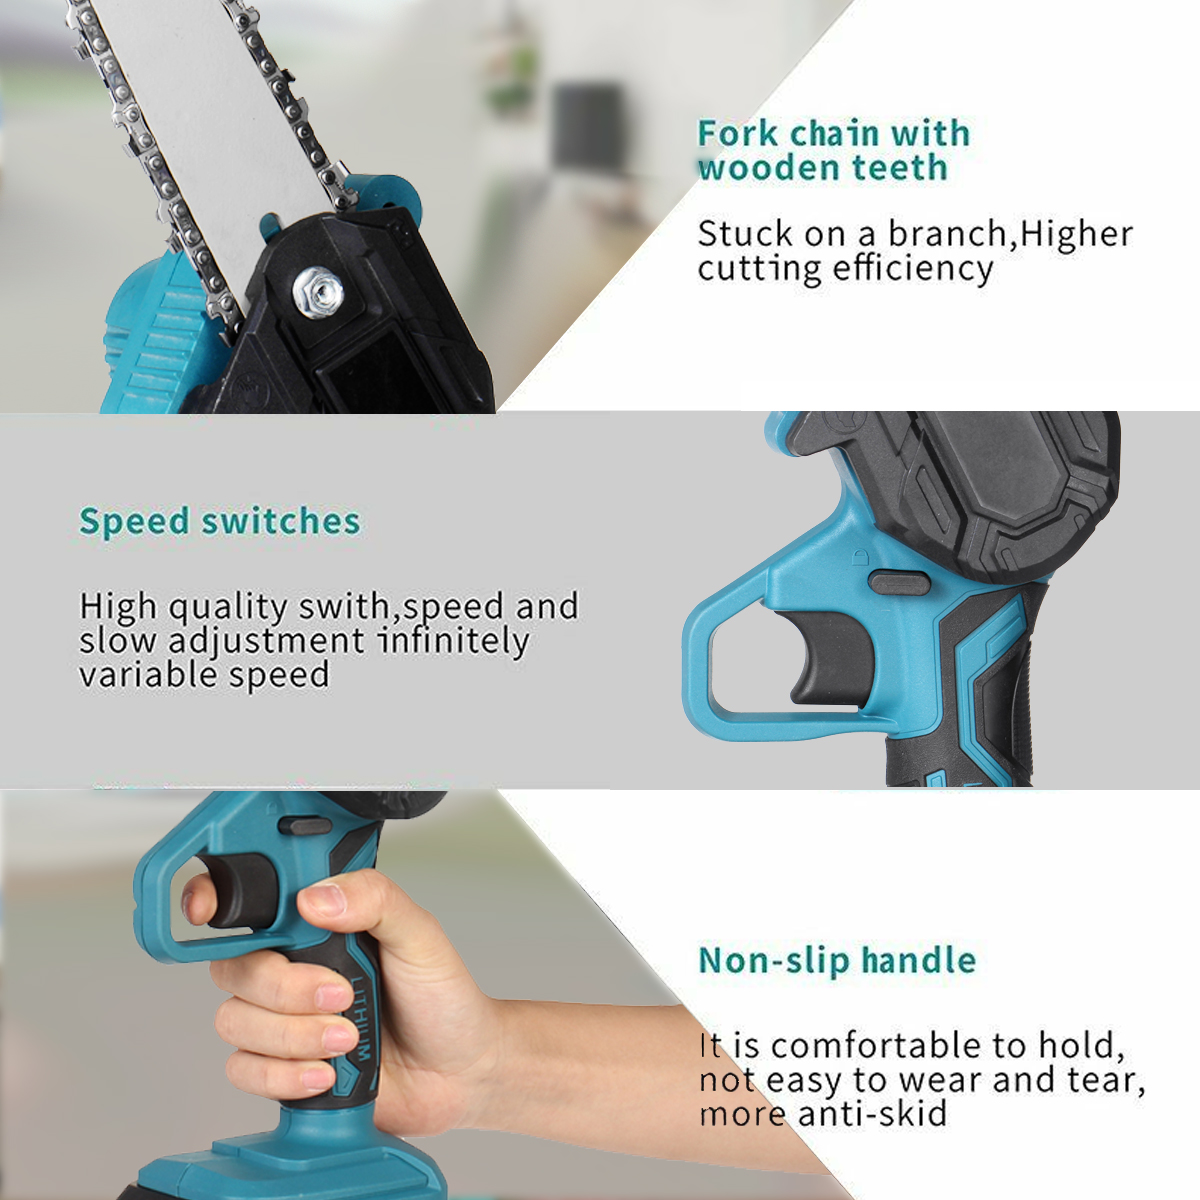 6-Inch-Mini-Cordless-Electric-Chainsaw-Woodworking-Wood-Cutter-Rechargeable-Portable-Chain-Saw-W-Non-1863317-14